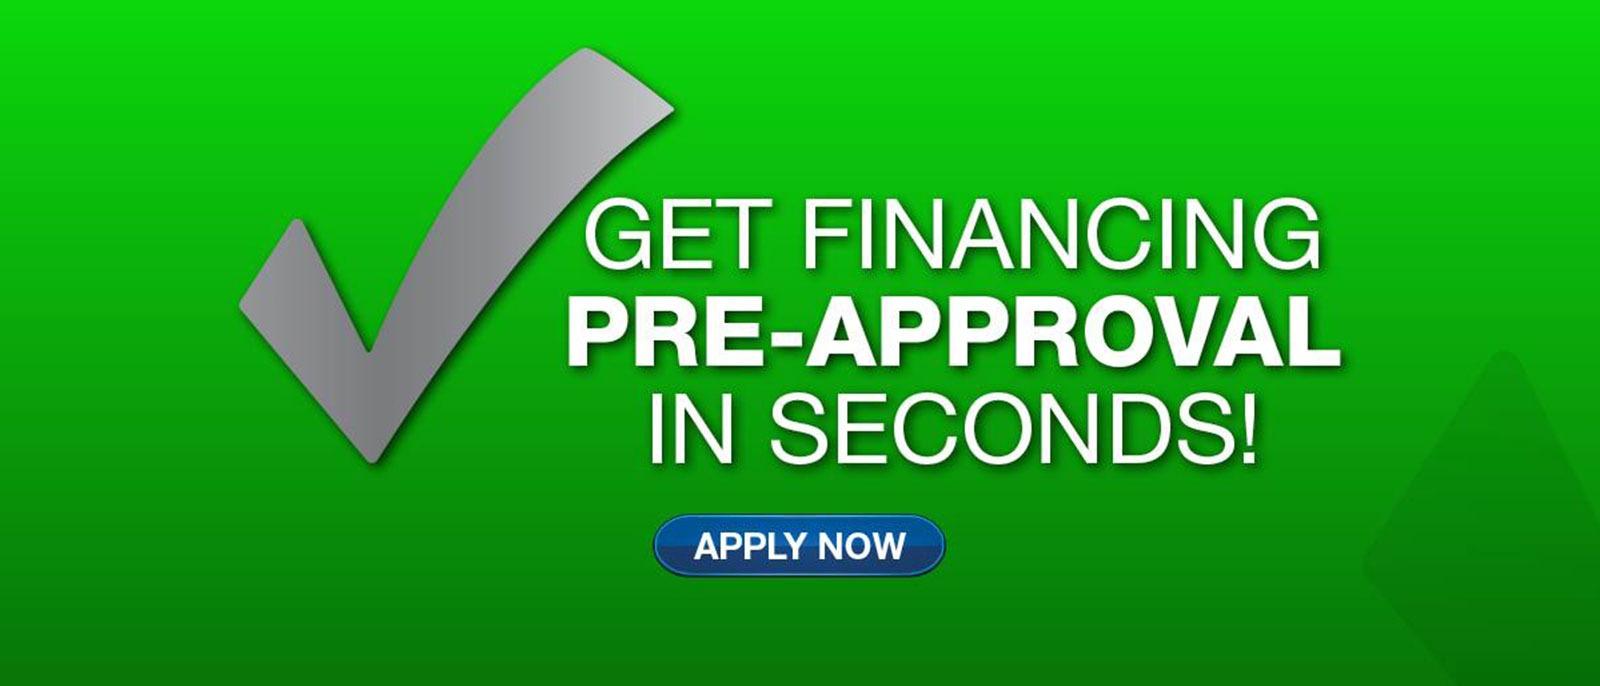 Get Financing Pre-Approval In Seconds!